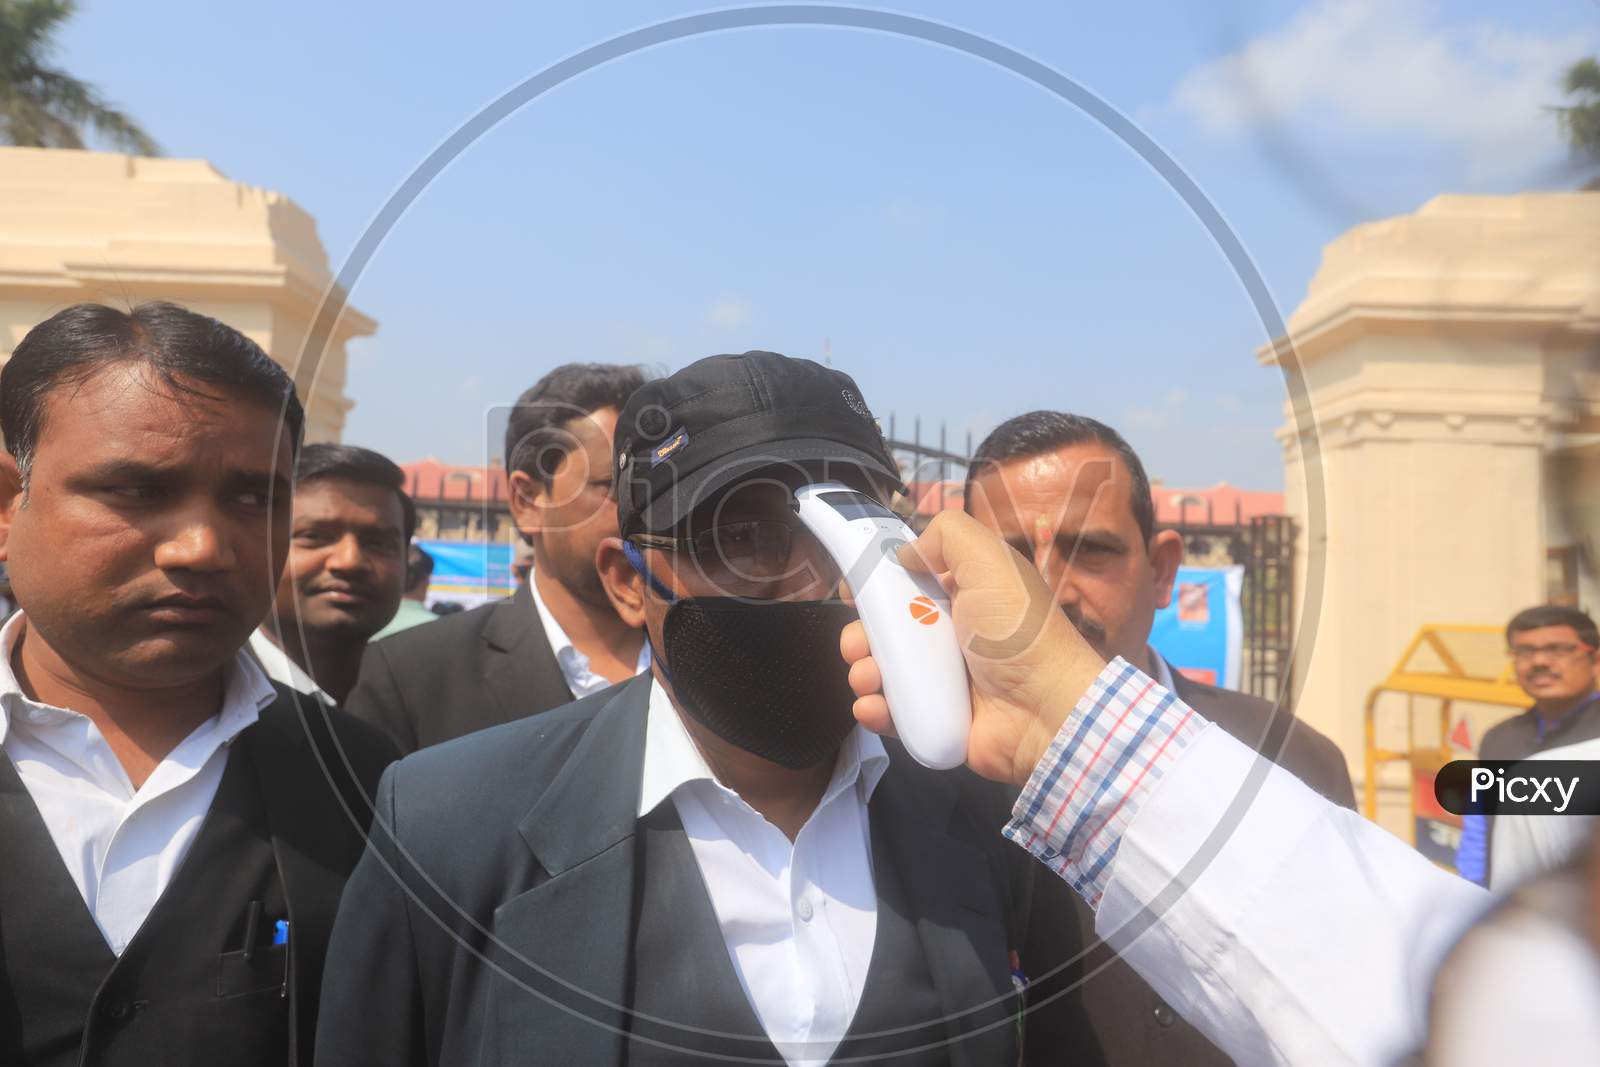 Thermal Scanning For Lawyers At Allahabad High Court Due To Corona Virus Or COVID 19 Outbreak in India